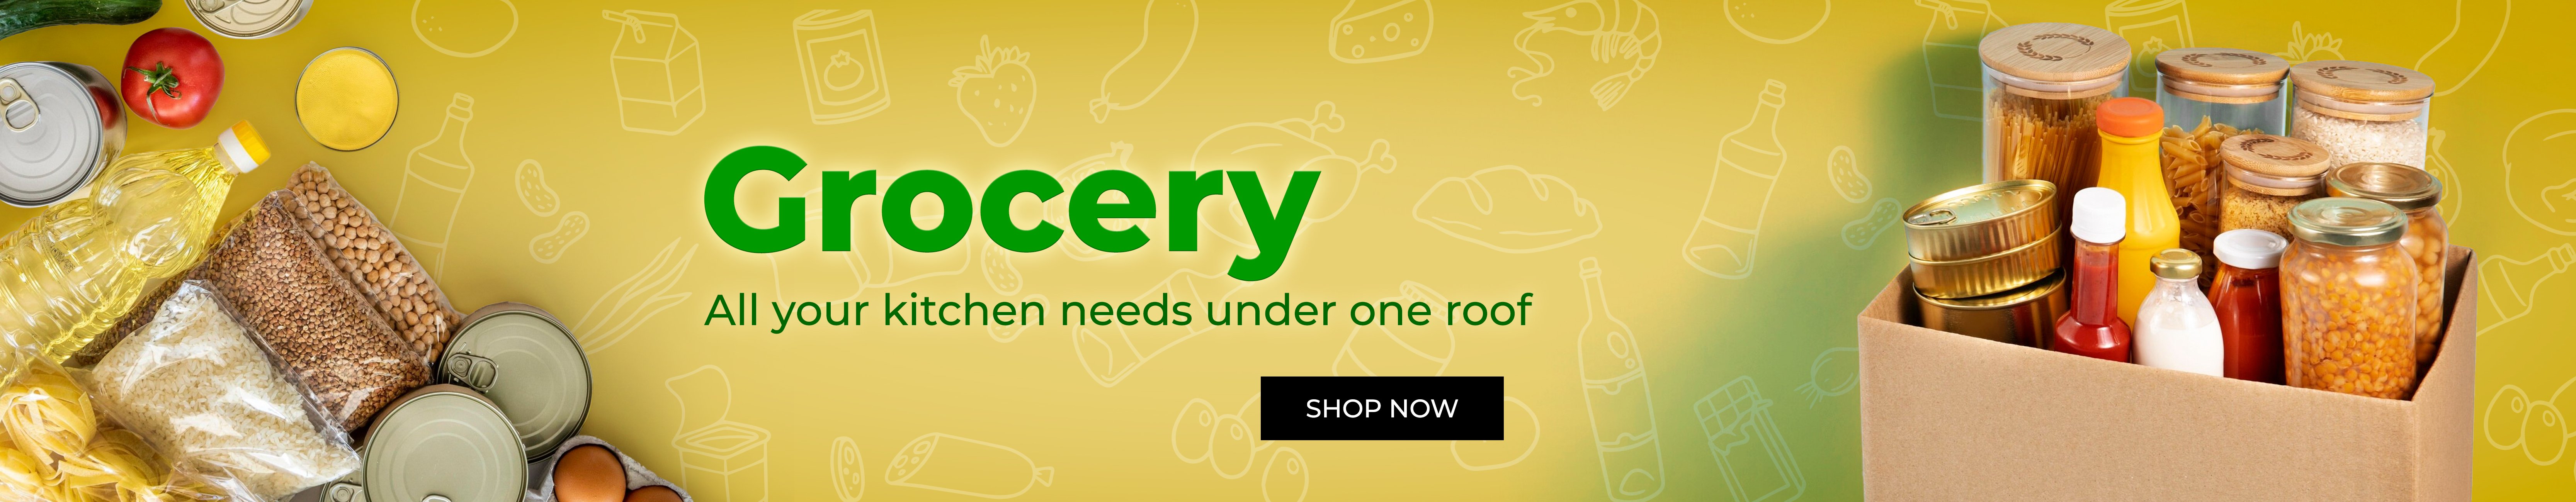 Grocery Main Banner